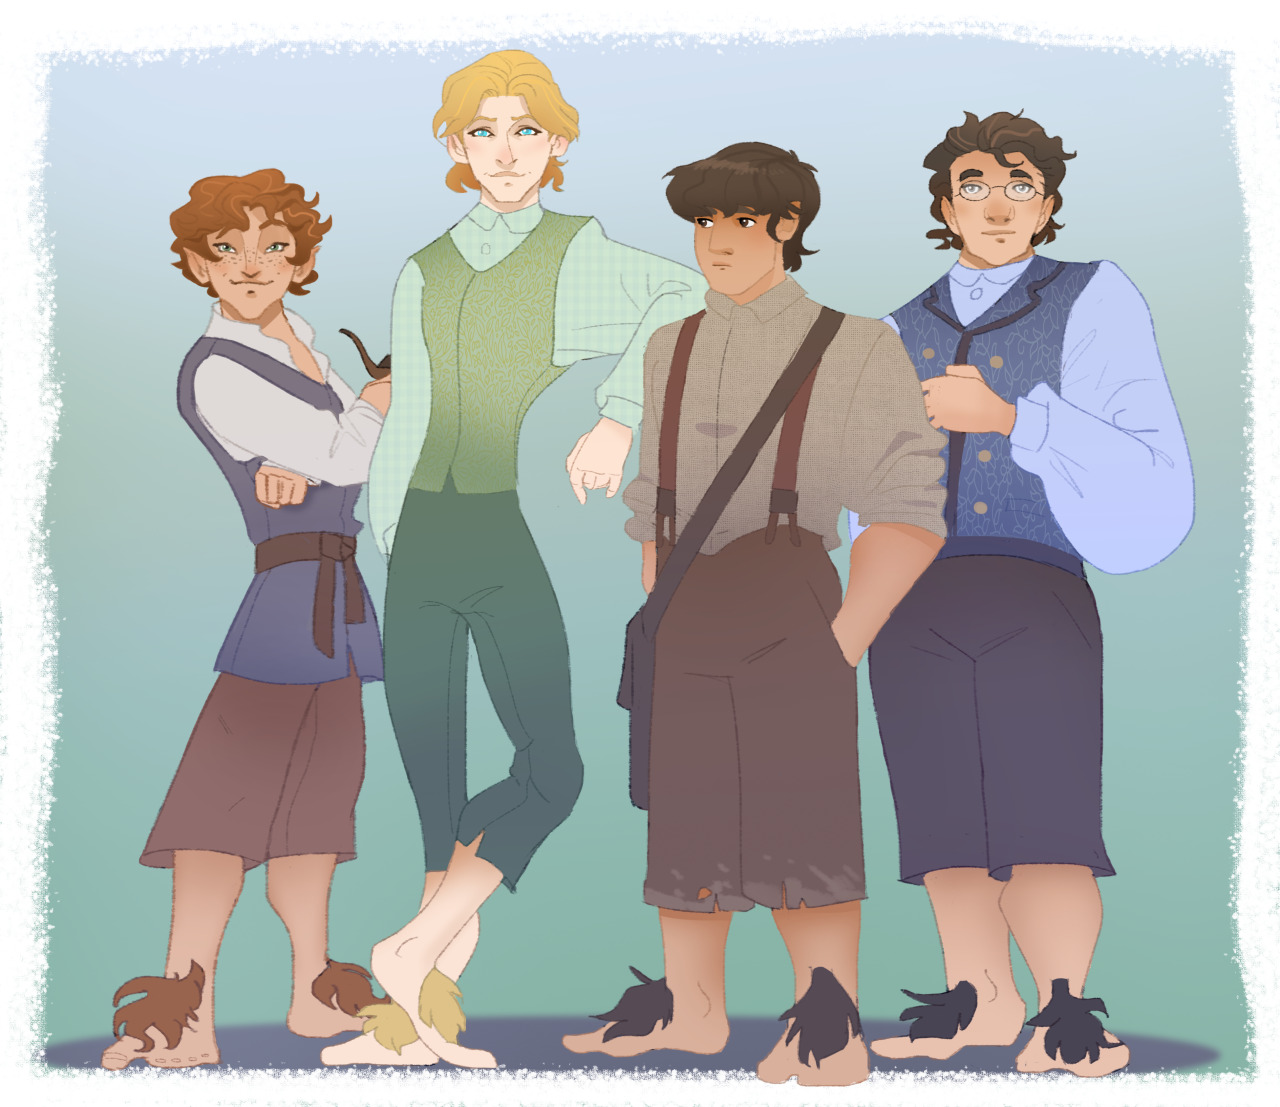 it's fine — Hobbity character designs from a while ago. Just...